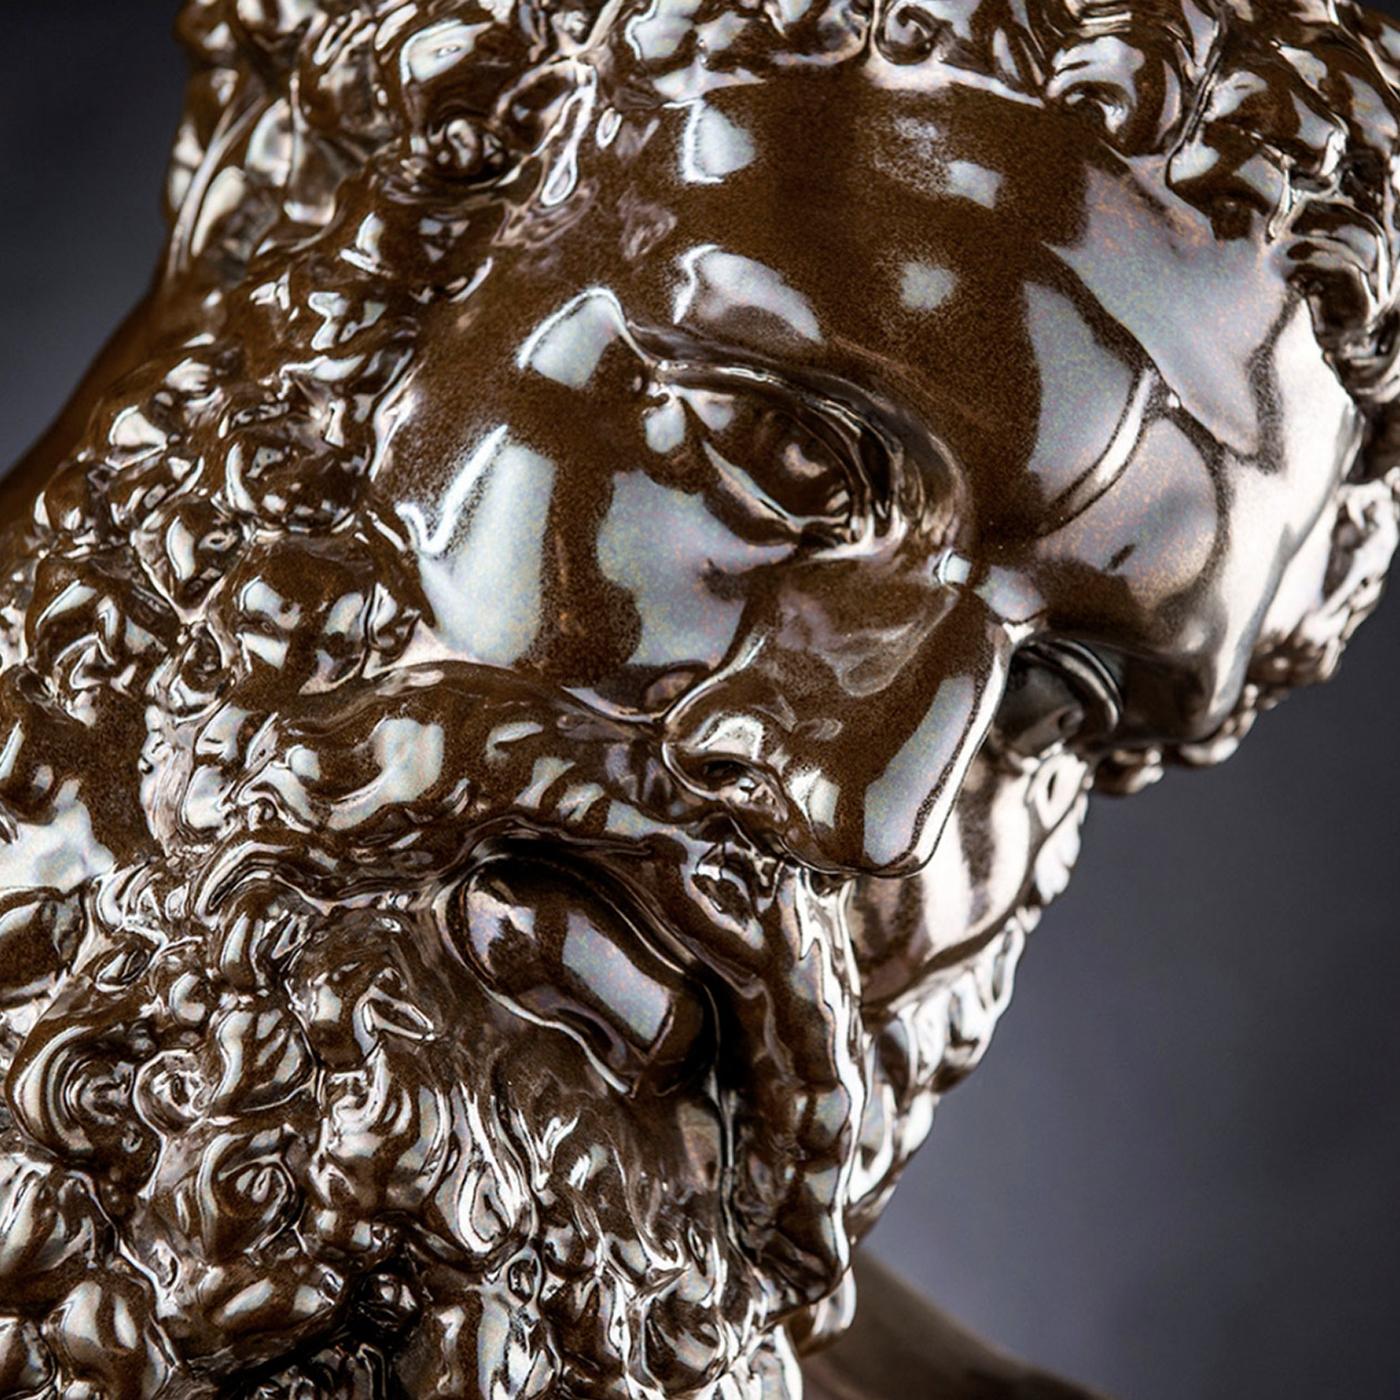 Entirely handcrafted of ceramic with an elegant glossy brown glaze, this decorative sculpture depicts the mythological hero Hercules, here reinterpreted with a modern twist. Unique and generously sized, this piece will make a statement whether used